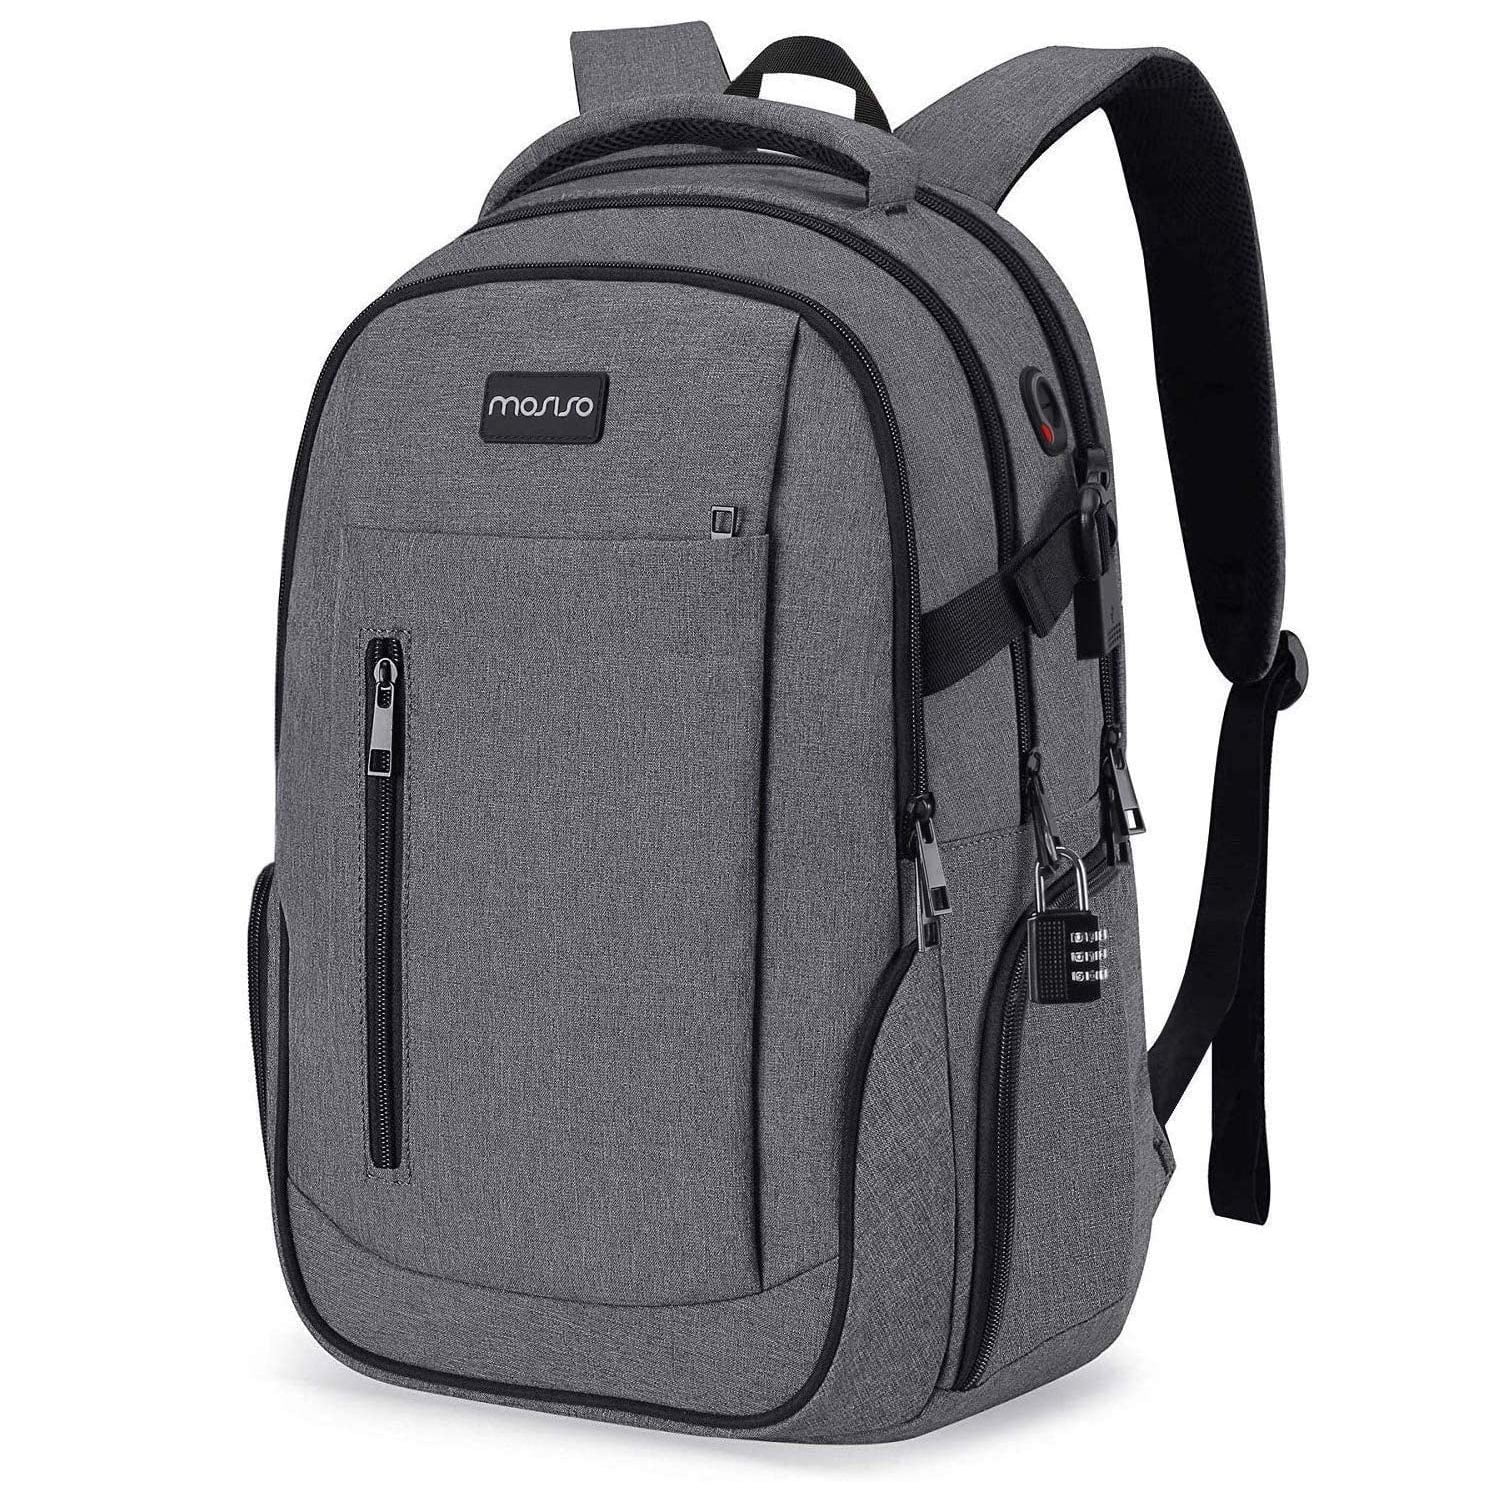 Pink Laptop Backpack For 15 Inch Laptop With Waterproof Nylon For Men And Women Casual Laptop Bag Anti Theft